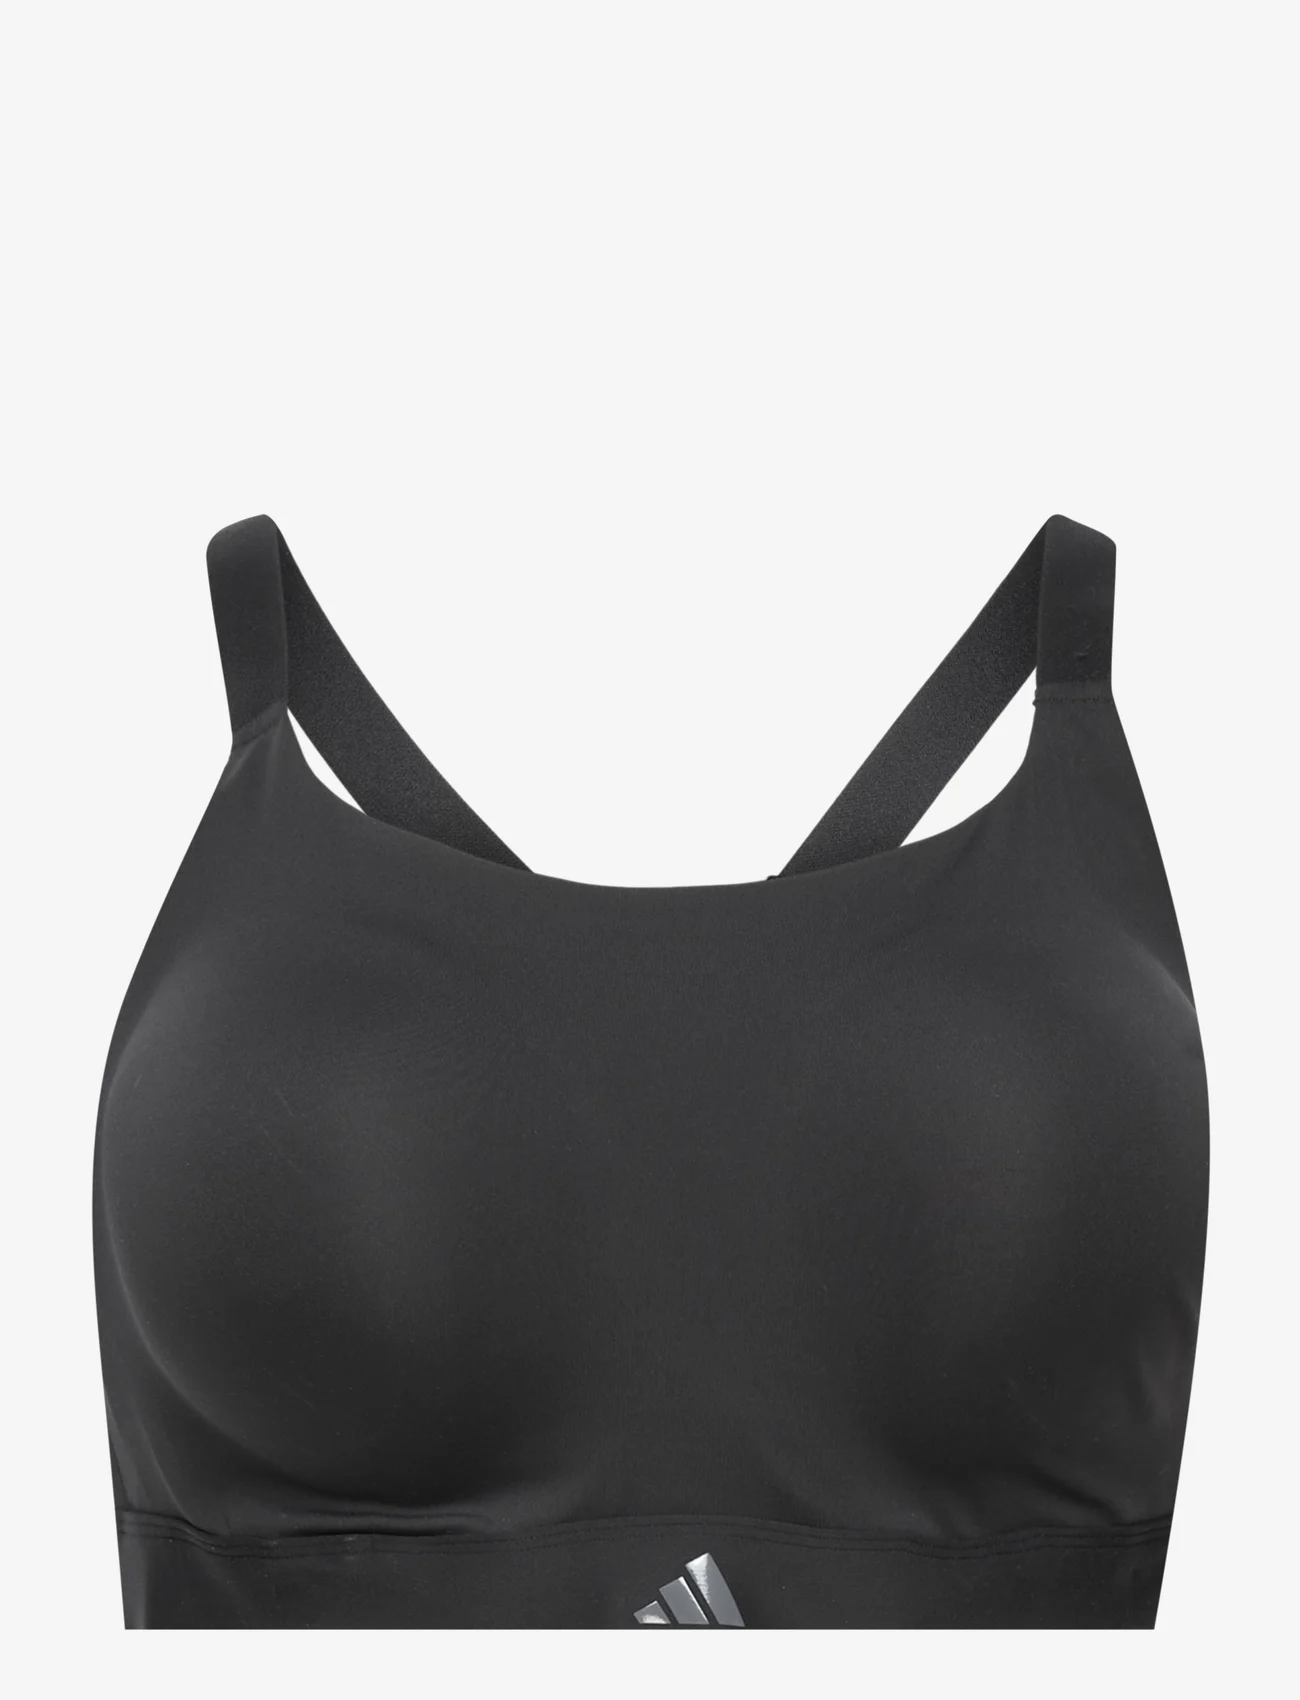 adidas Performance - Tailored Impact Luxe Training High-Support Bra (Plus Size) - sport bras - black - 0